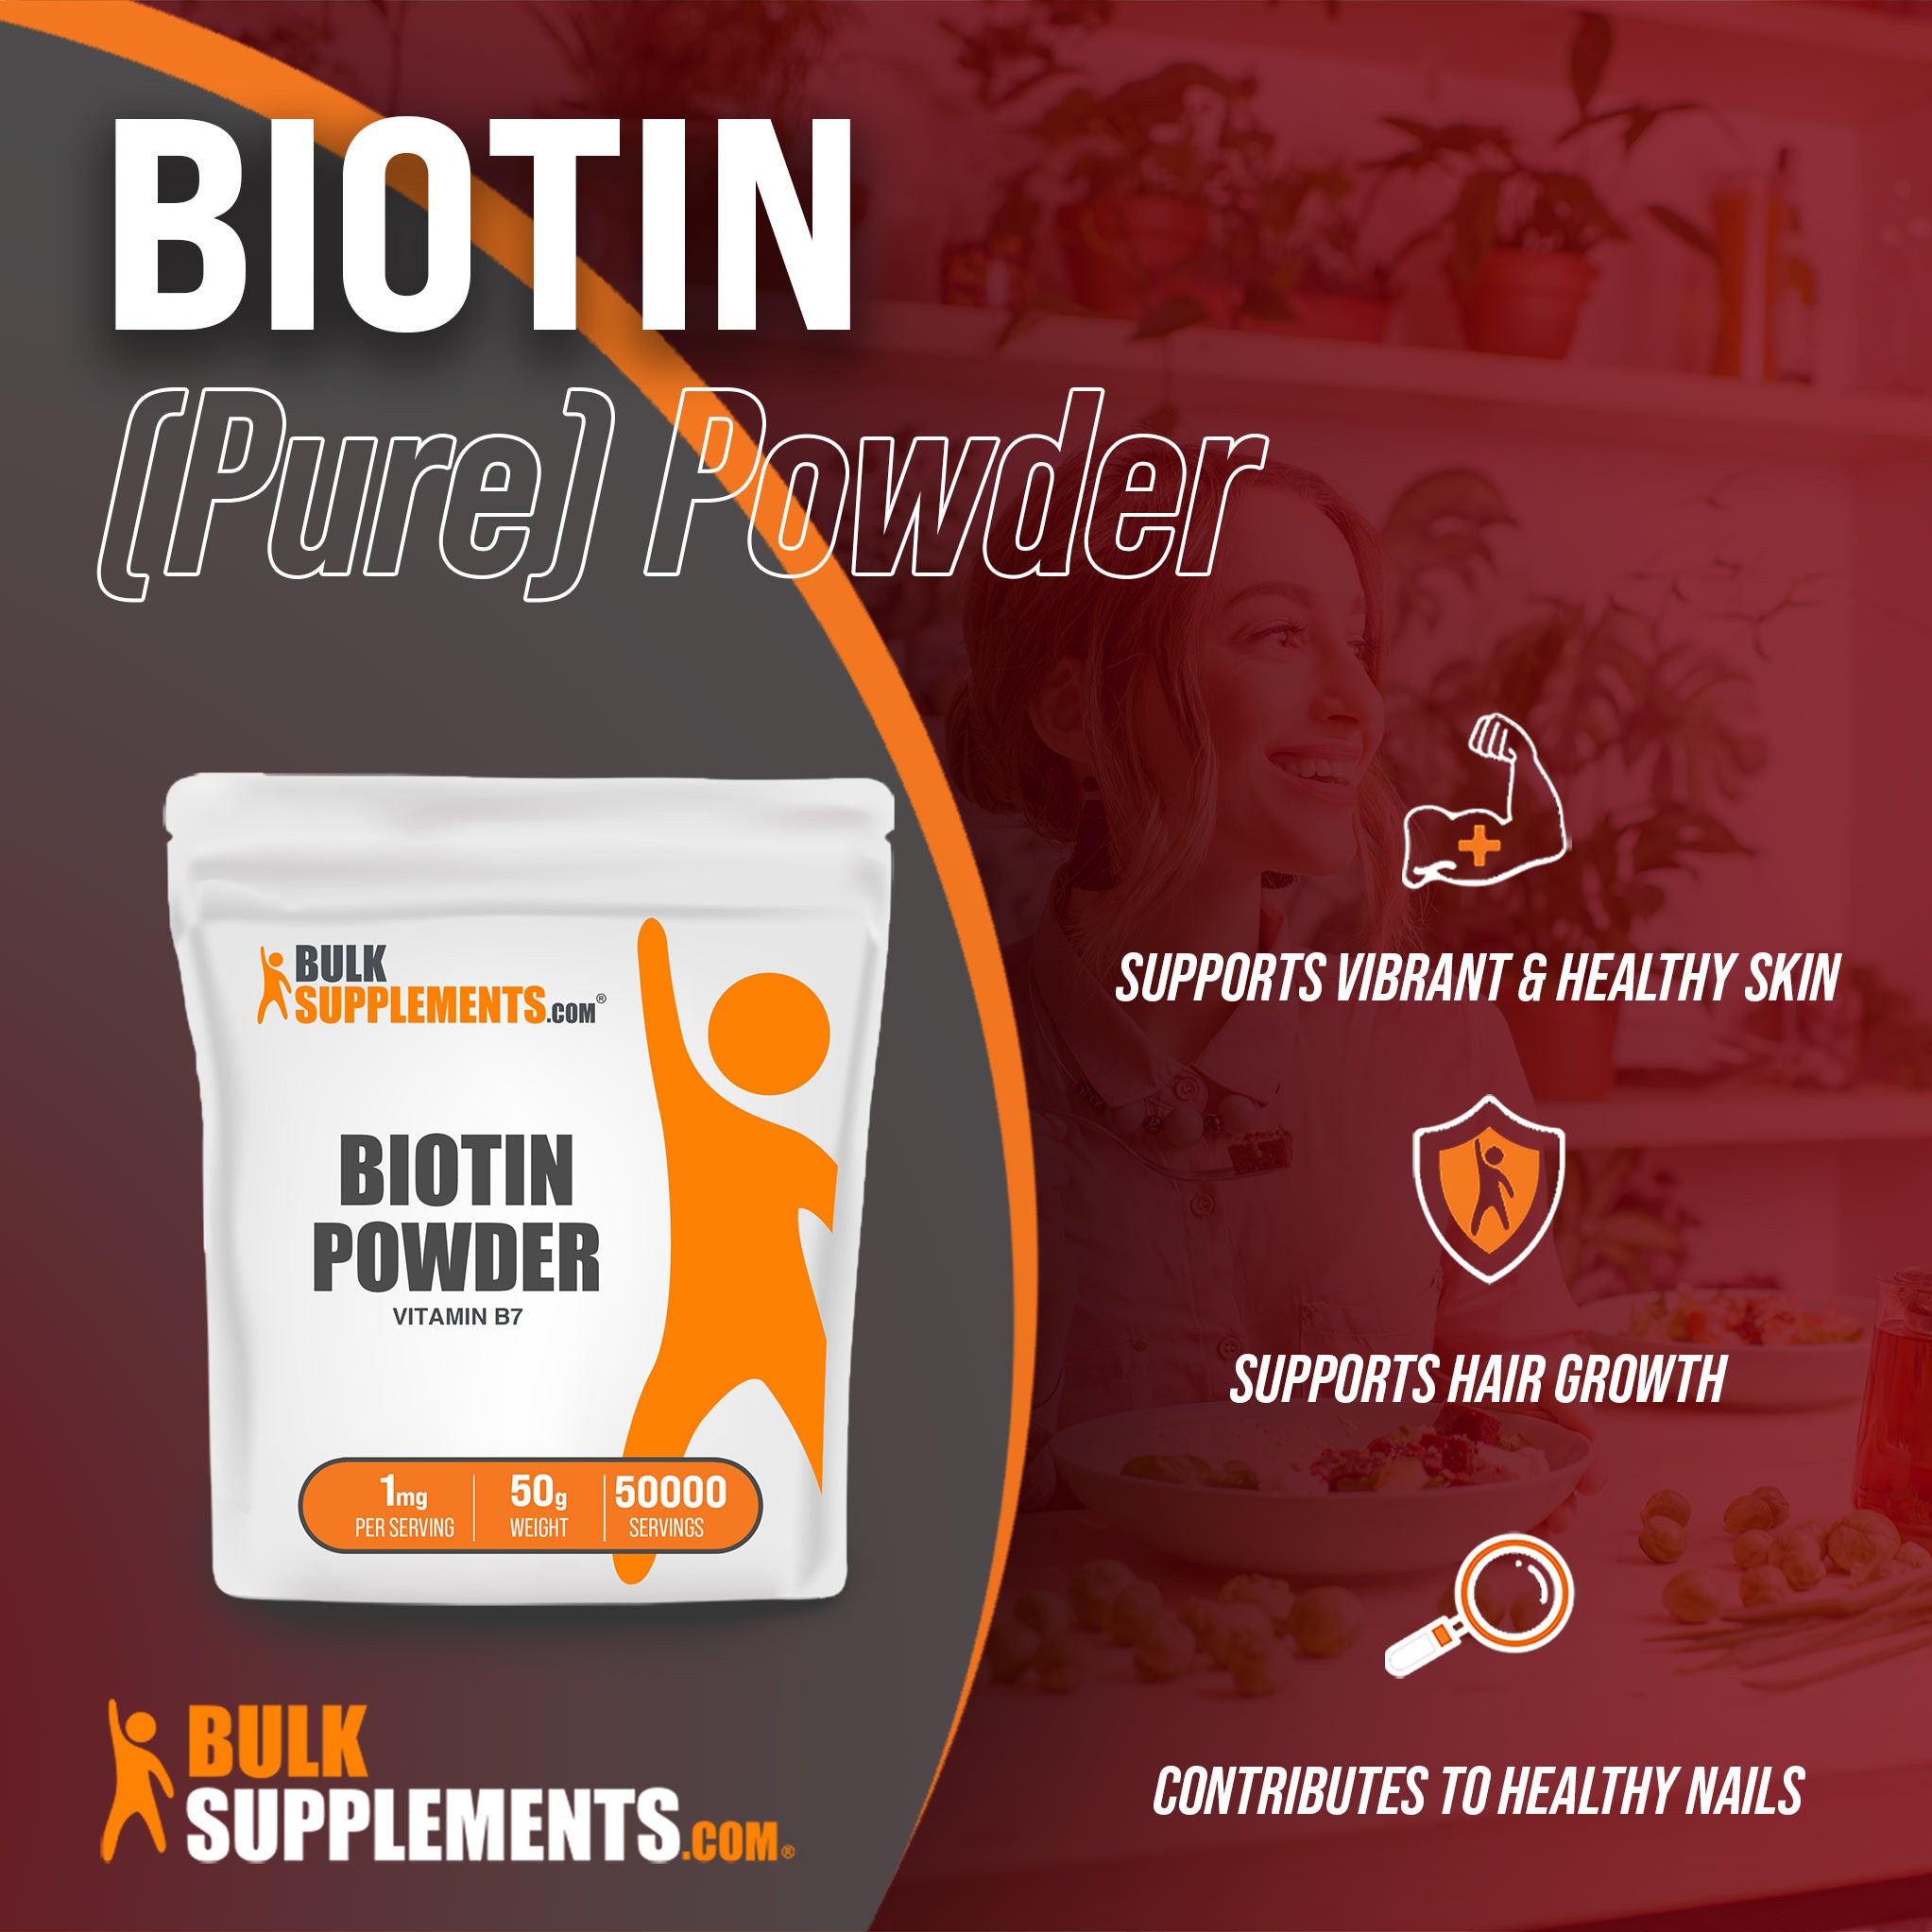 Benefits of Pure Biotin Powder: supports vibrant and healthy skin, supports hair growth, contributes to healthy nails